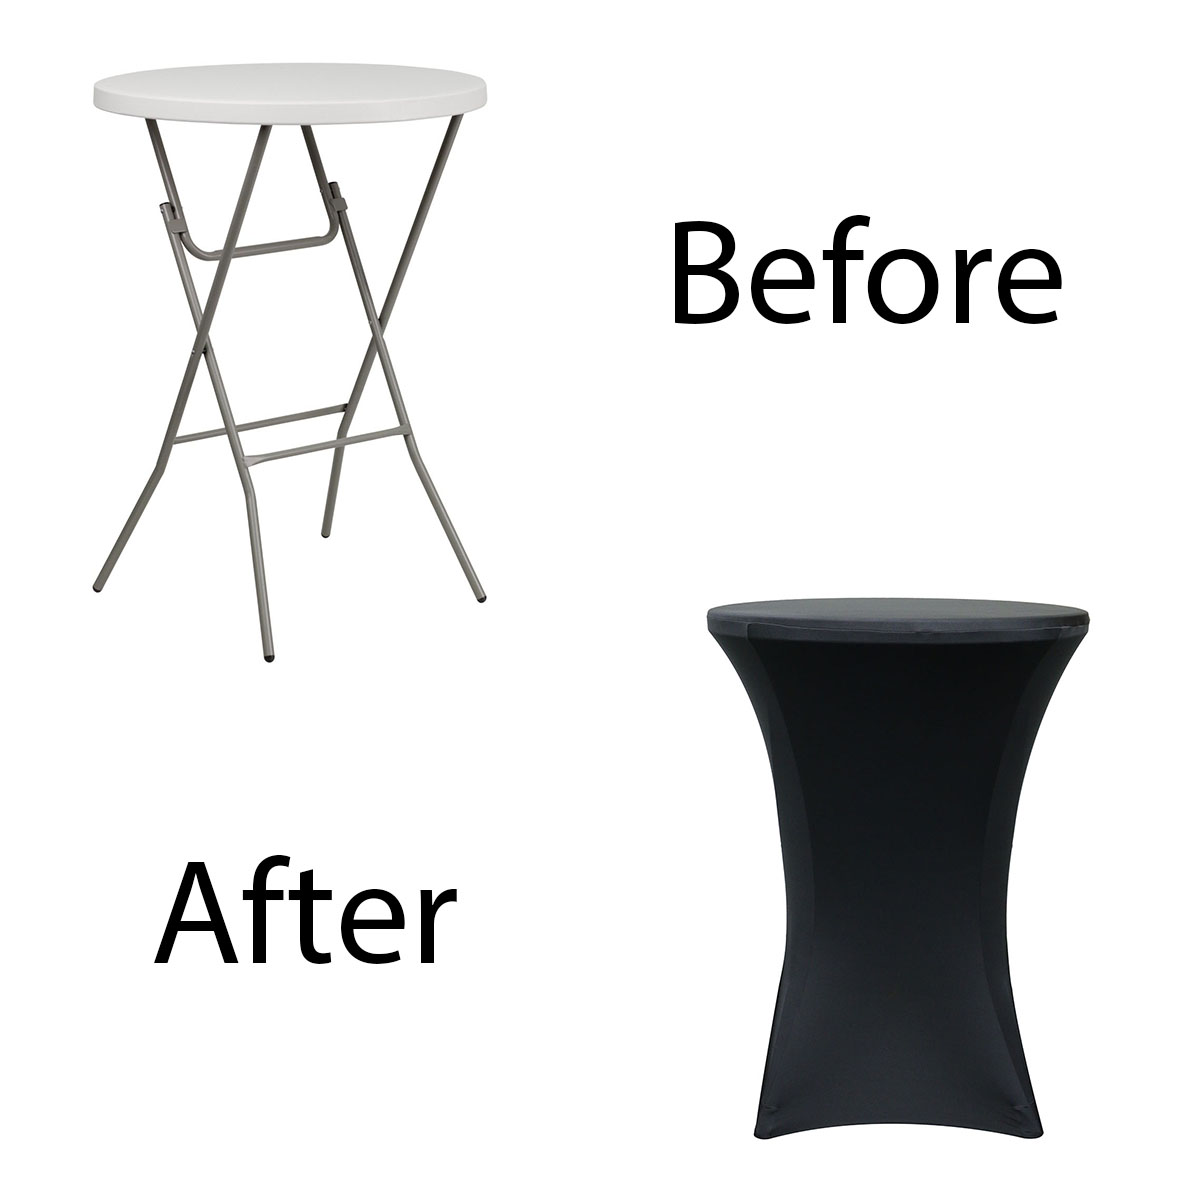 32-inch-highboy-cocktail-spandex-table-covers-black-before-after.jpg